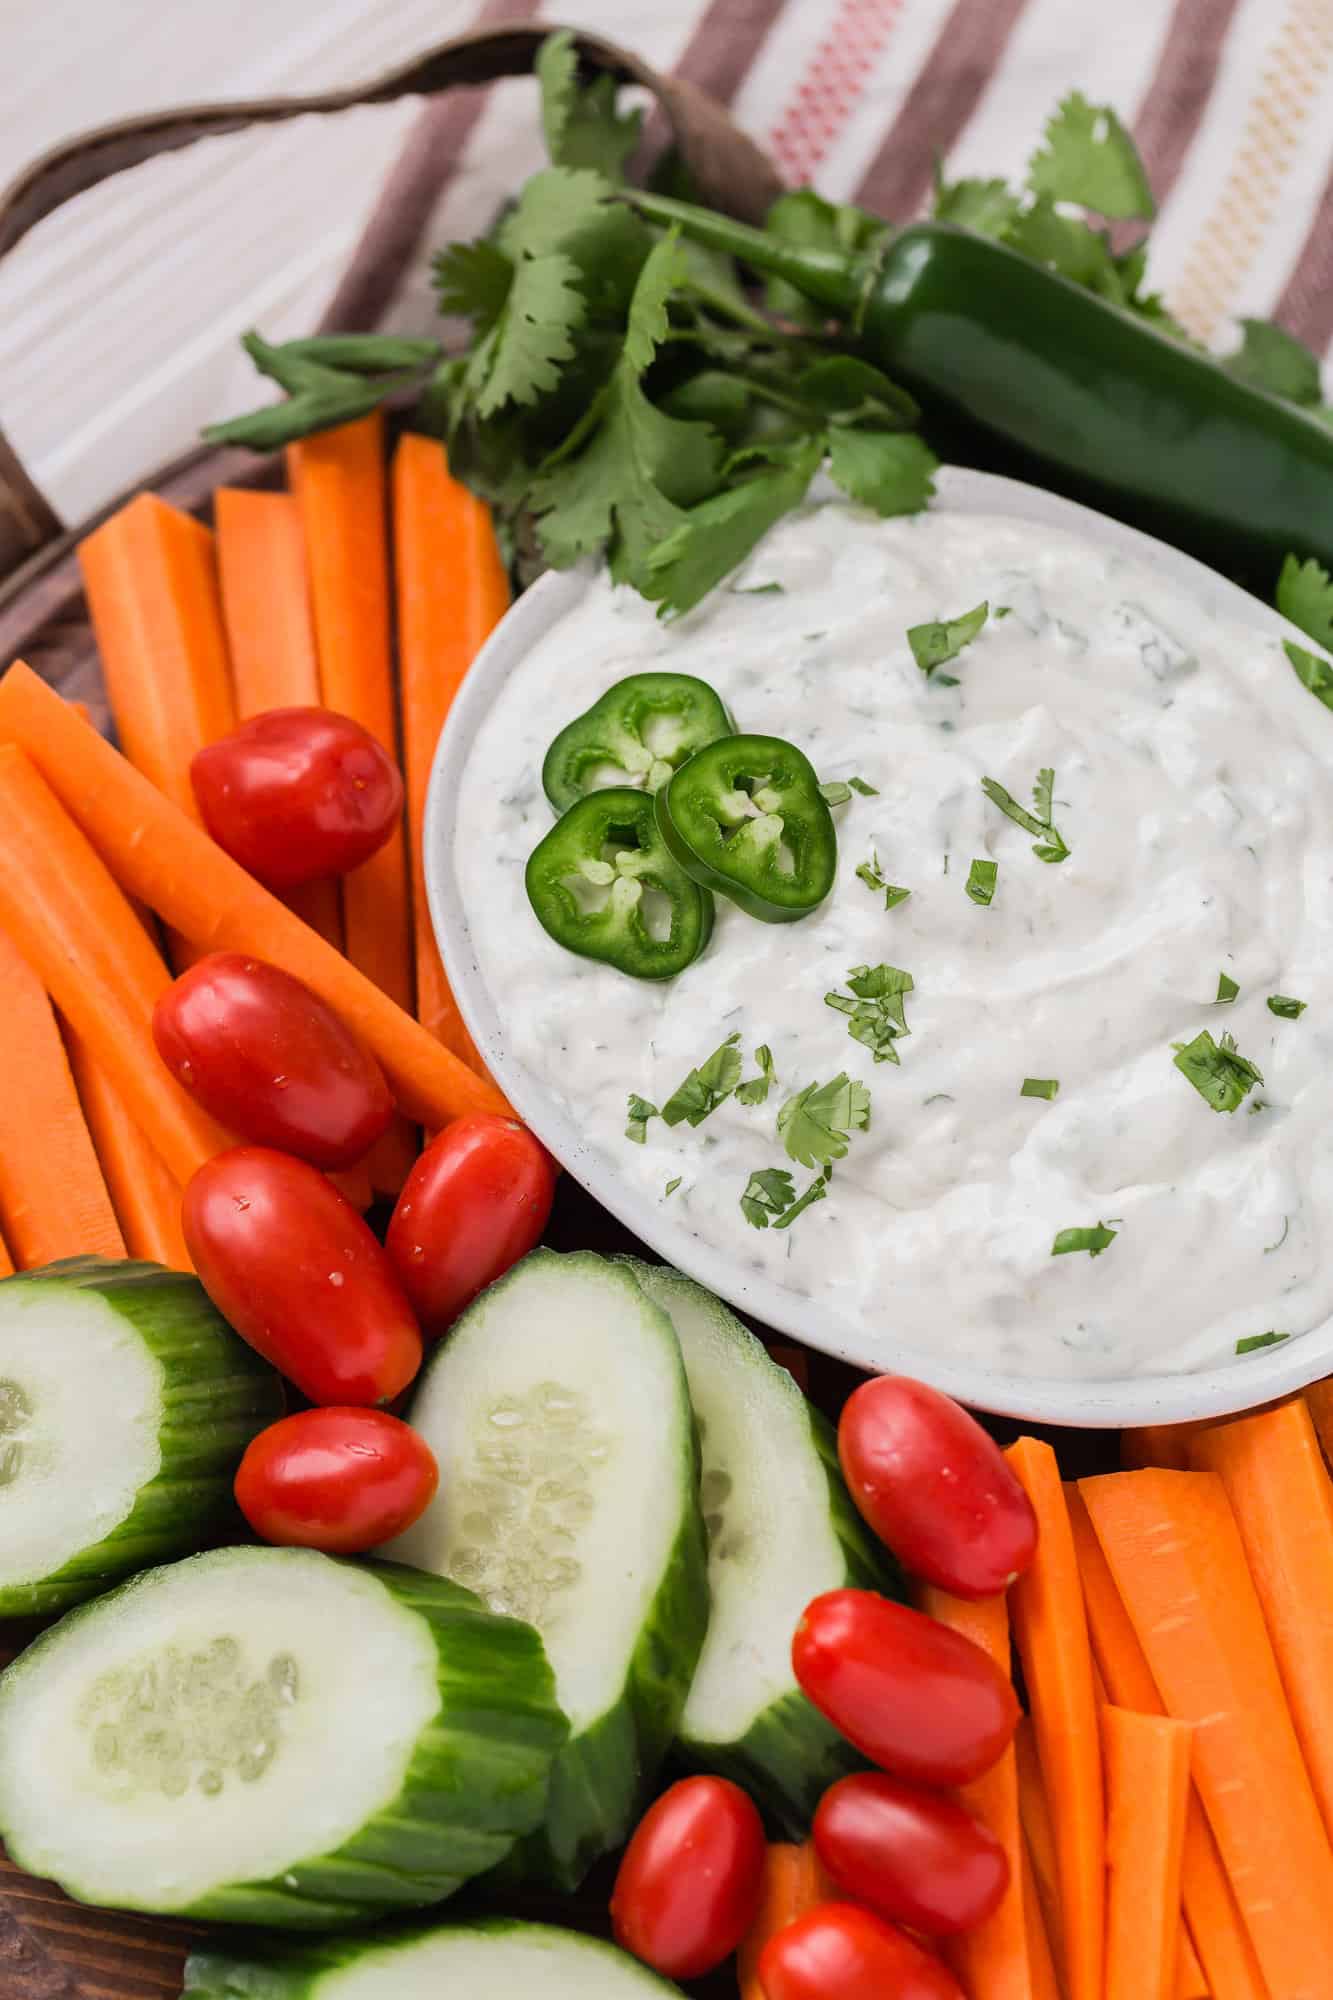 Carrots, cucumbers, tomatoes, and dip.